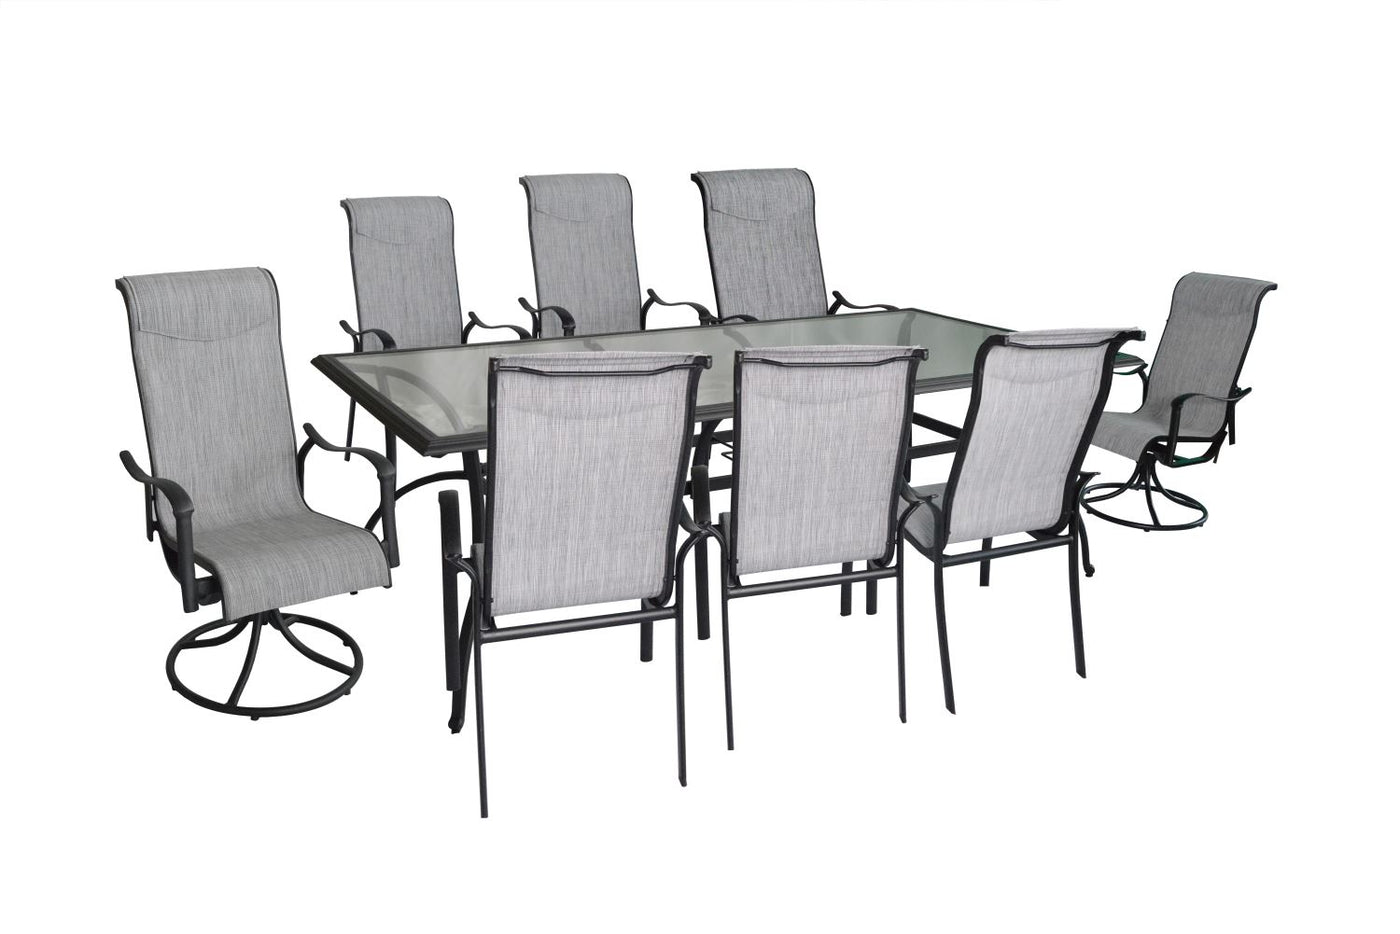 Hanlan 84" Outdoor Dining Table - Charcoal/Glass